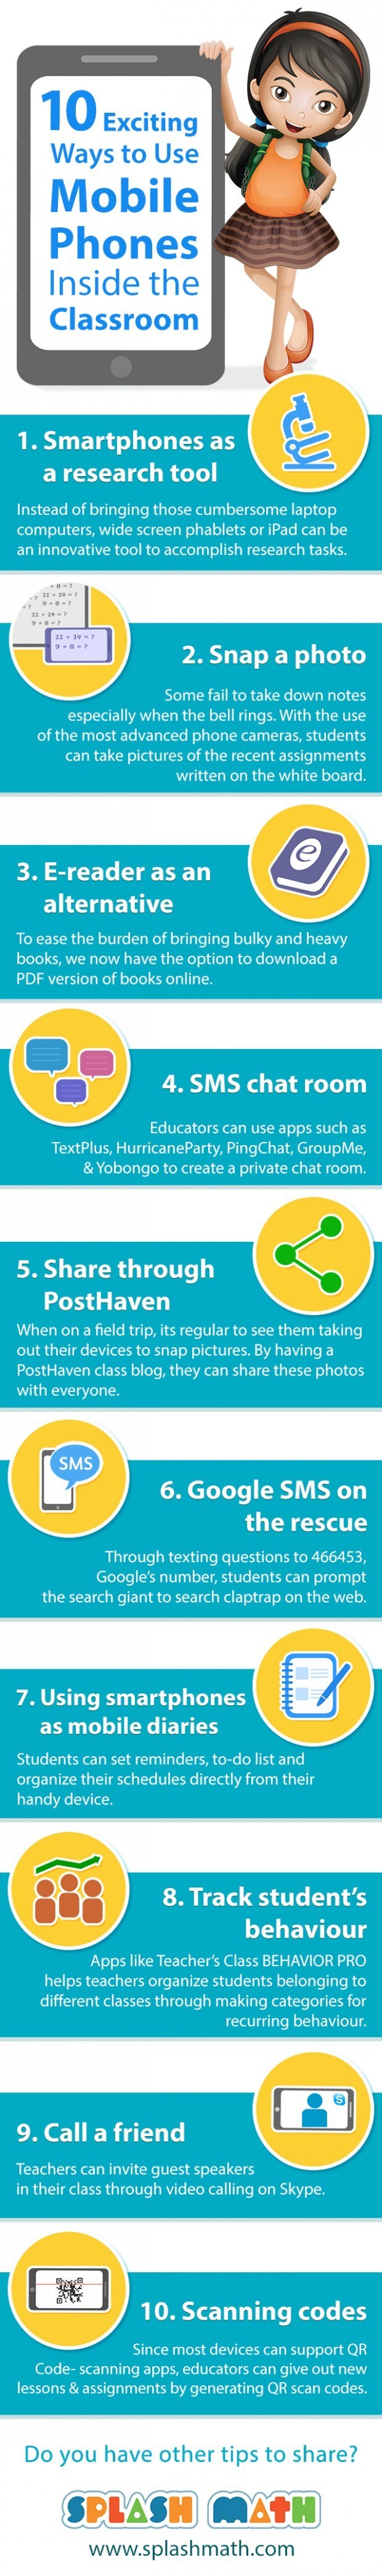 10-Exciting-Ways-to-Use-Mobile-Phones-Inside-the-Classroom-Infographic